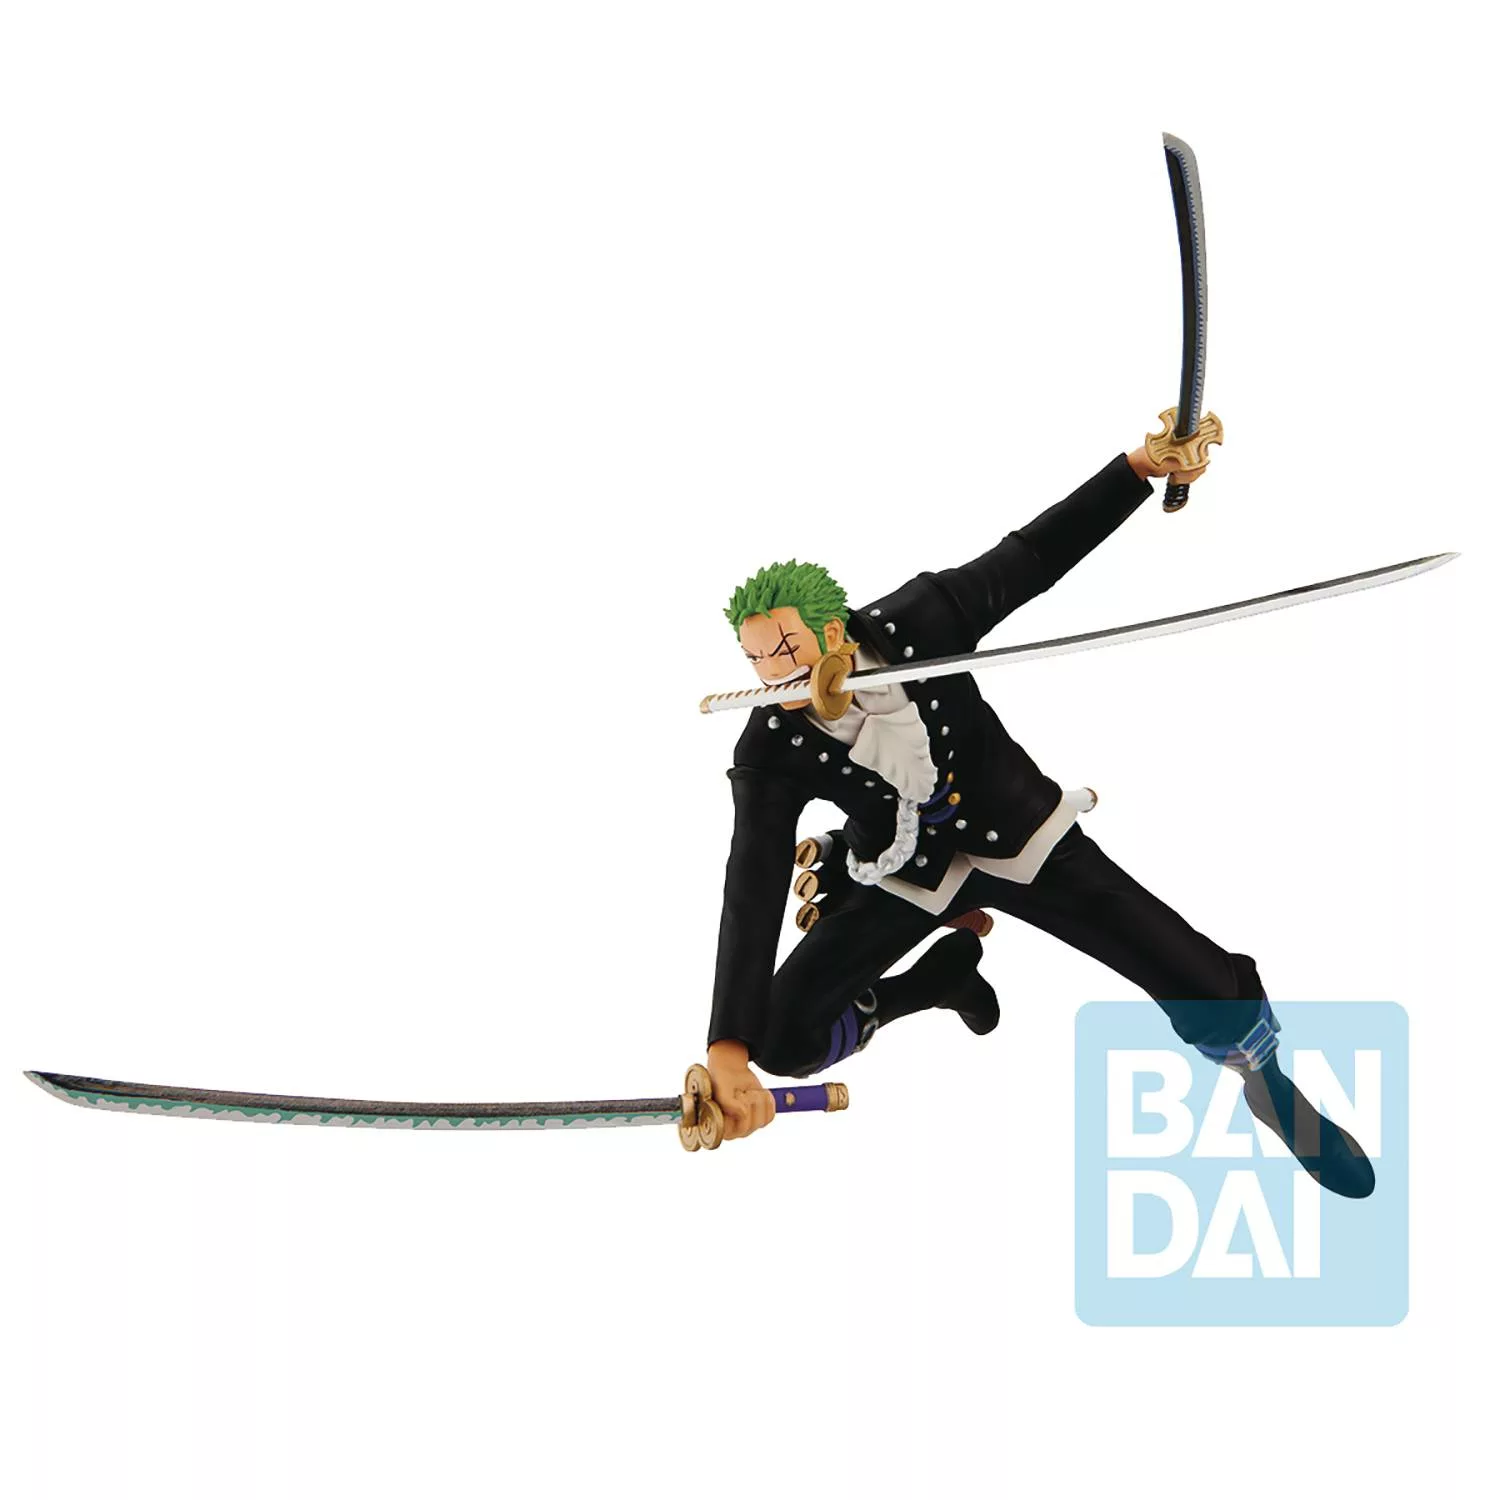 Variable Action Heroes One Piece Zoro Juro Approximately 180Mm Pvc Pai